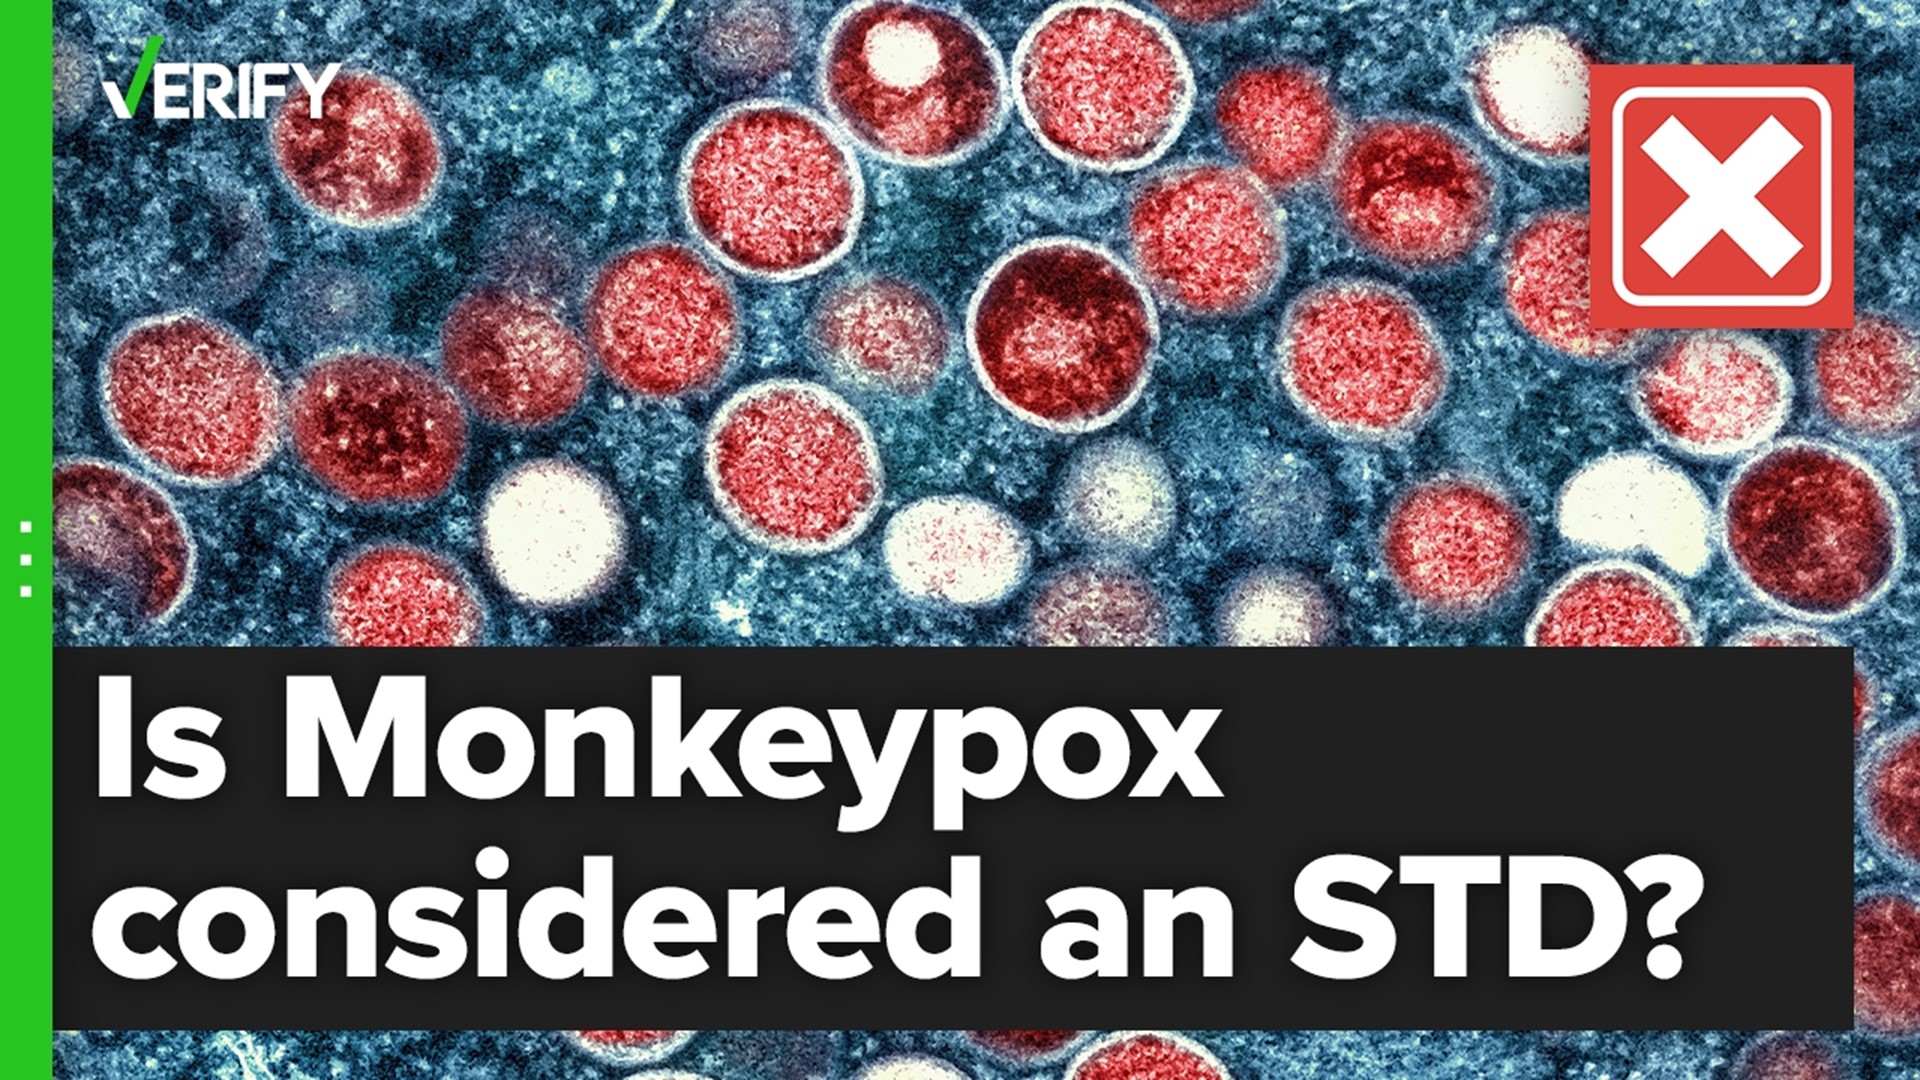 Is Monkeypox a sexually transmitted disease? The VERIFY team confirms this is false.